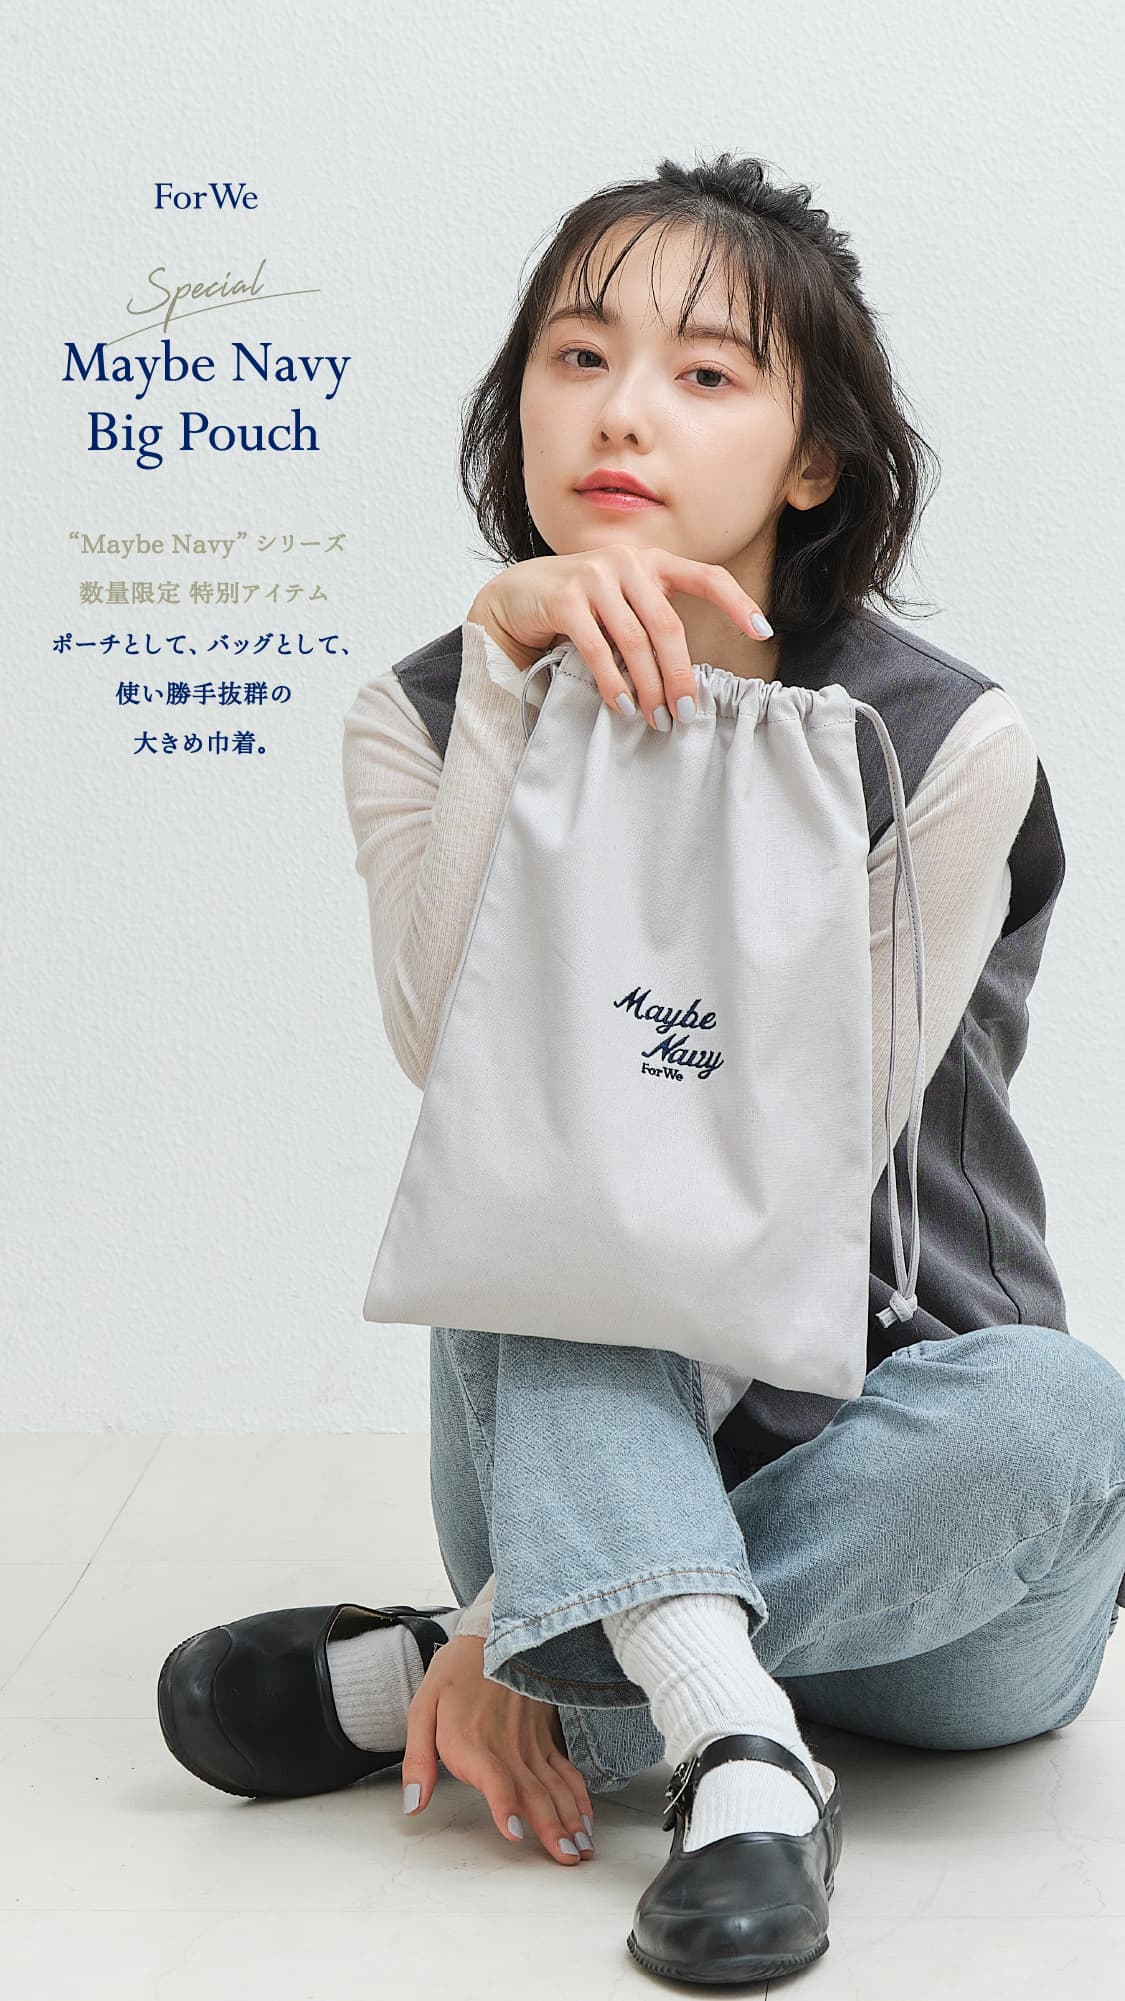 ForWe Special Maybe Navy Big Pouch “Maybe Navy”シリーズ 数量限定 特別アイテム ポーチとして、バッグとして、使い勝手抜群の大きめ巾着。